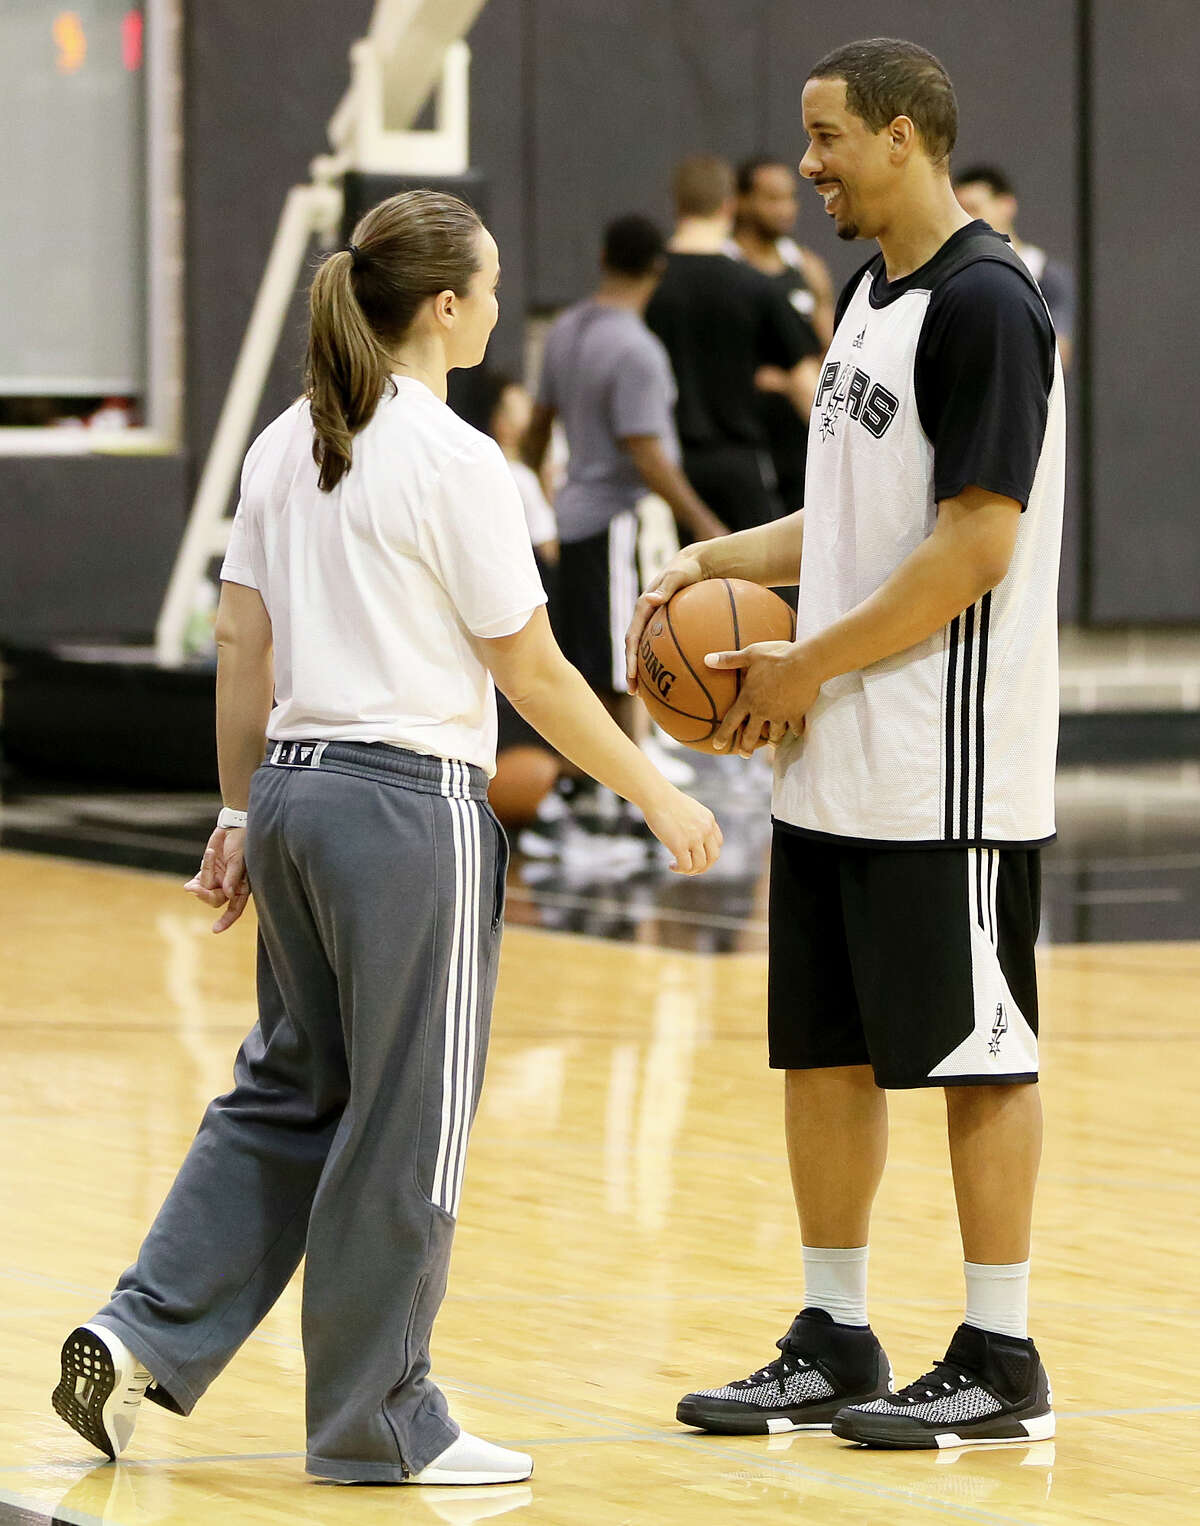 The newest Spurs roster addition, veteran guard Andre Miller, works with assistant coach Becky Hammon during his first workout at the Spurs practice facility on Tuesday, March 1, 2016.